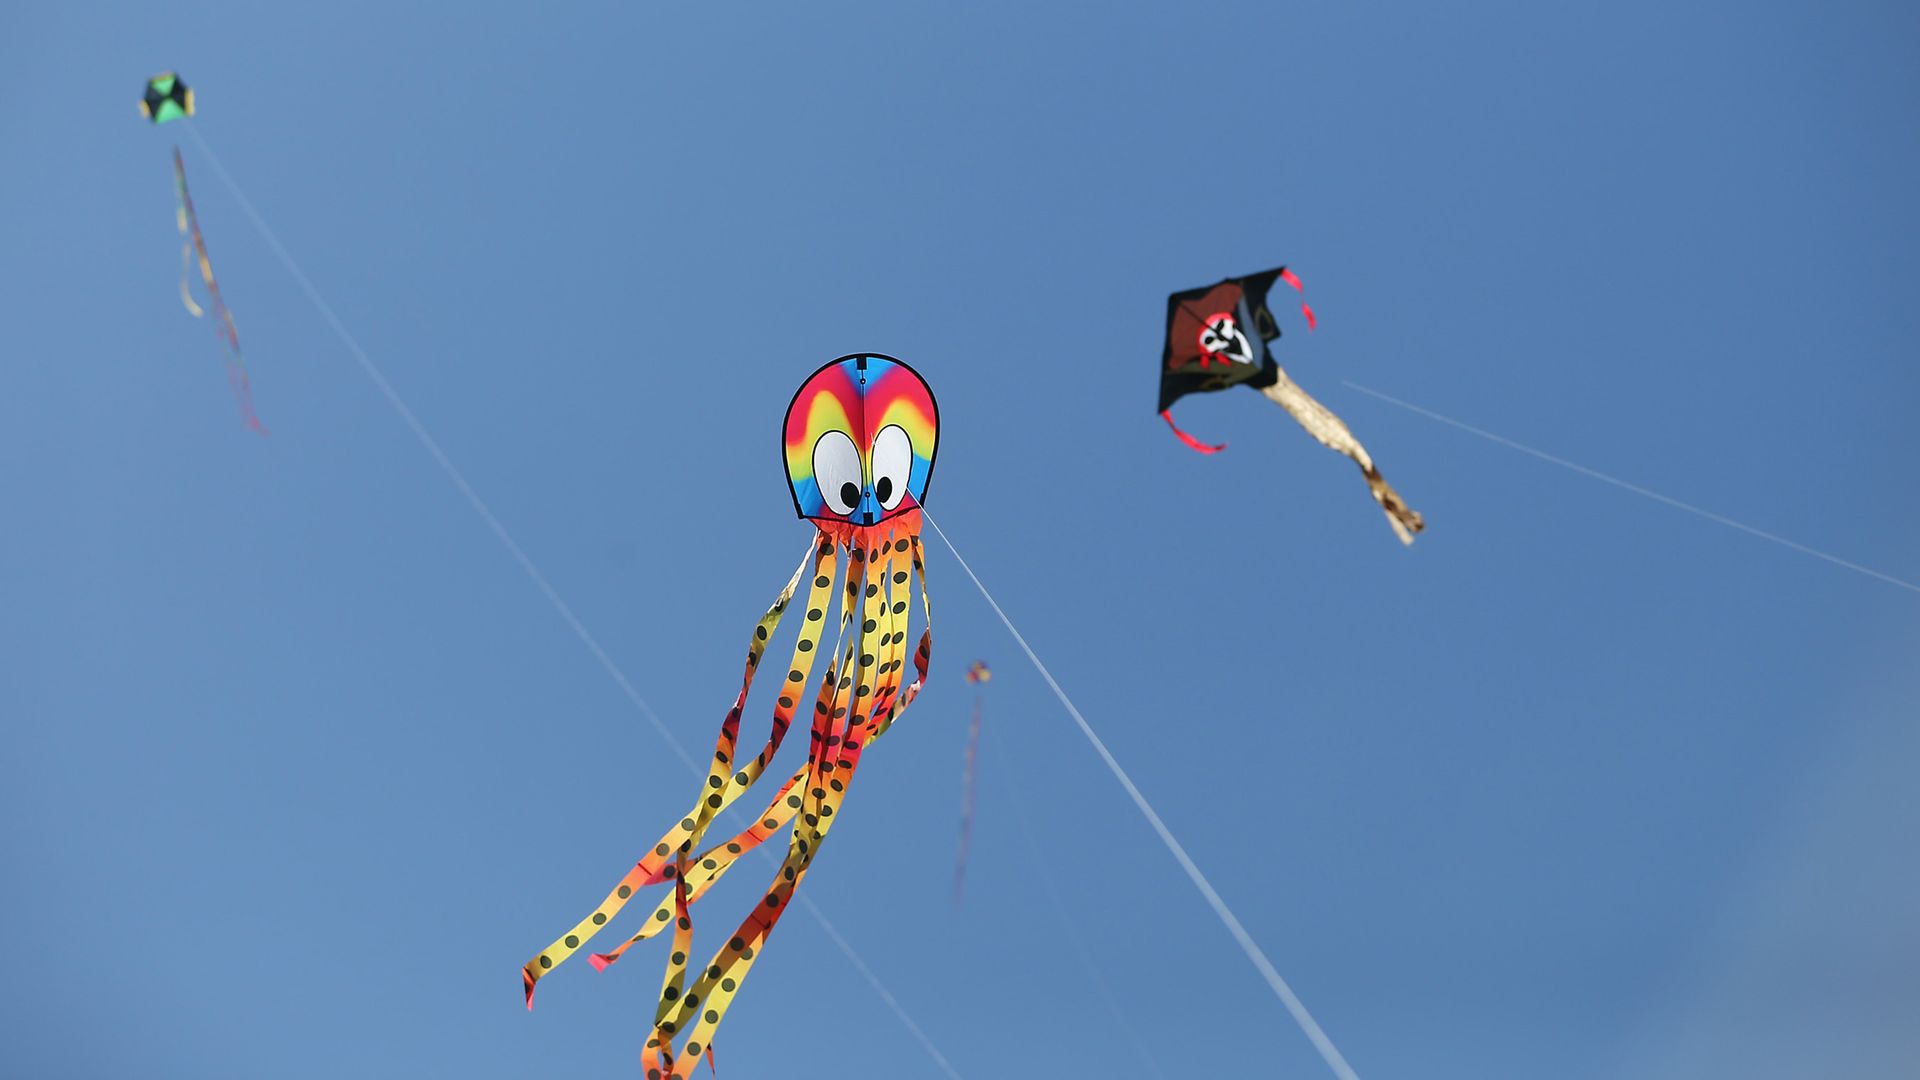 A kite that looks like an rainbow-colored octopus flies in a clear blue sky